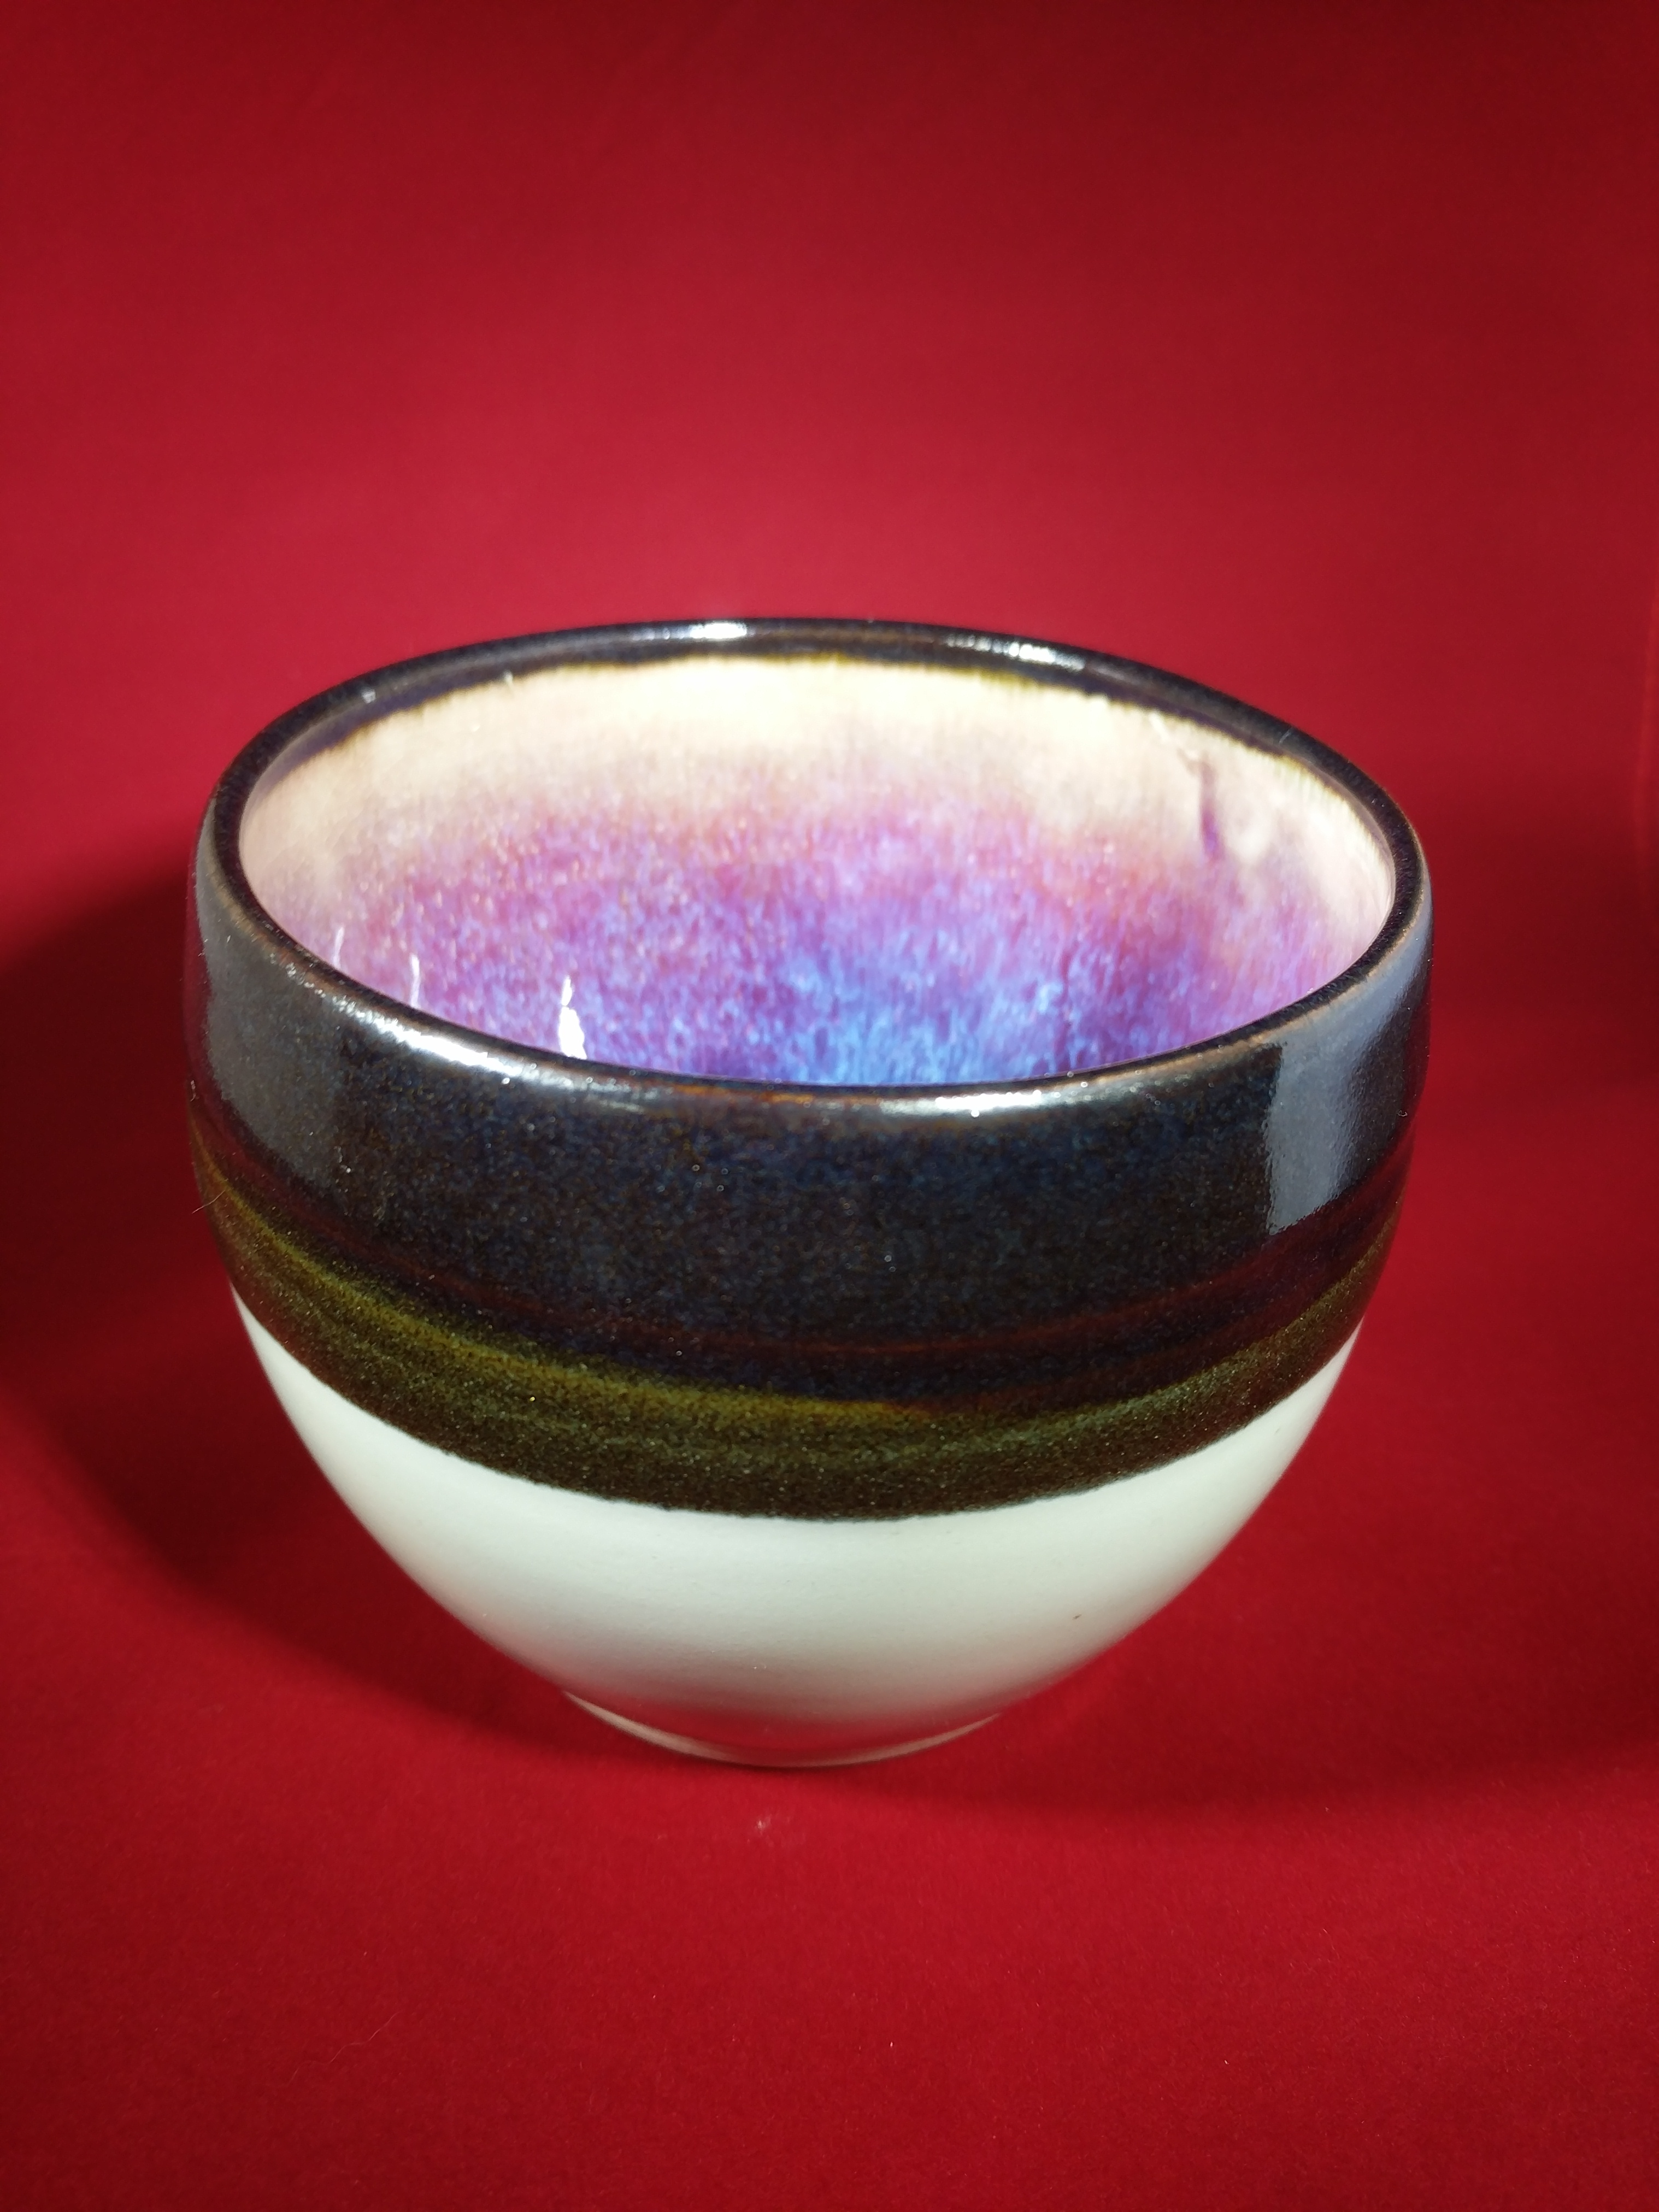 Black and White rice bowl with opal glaze interior